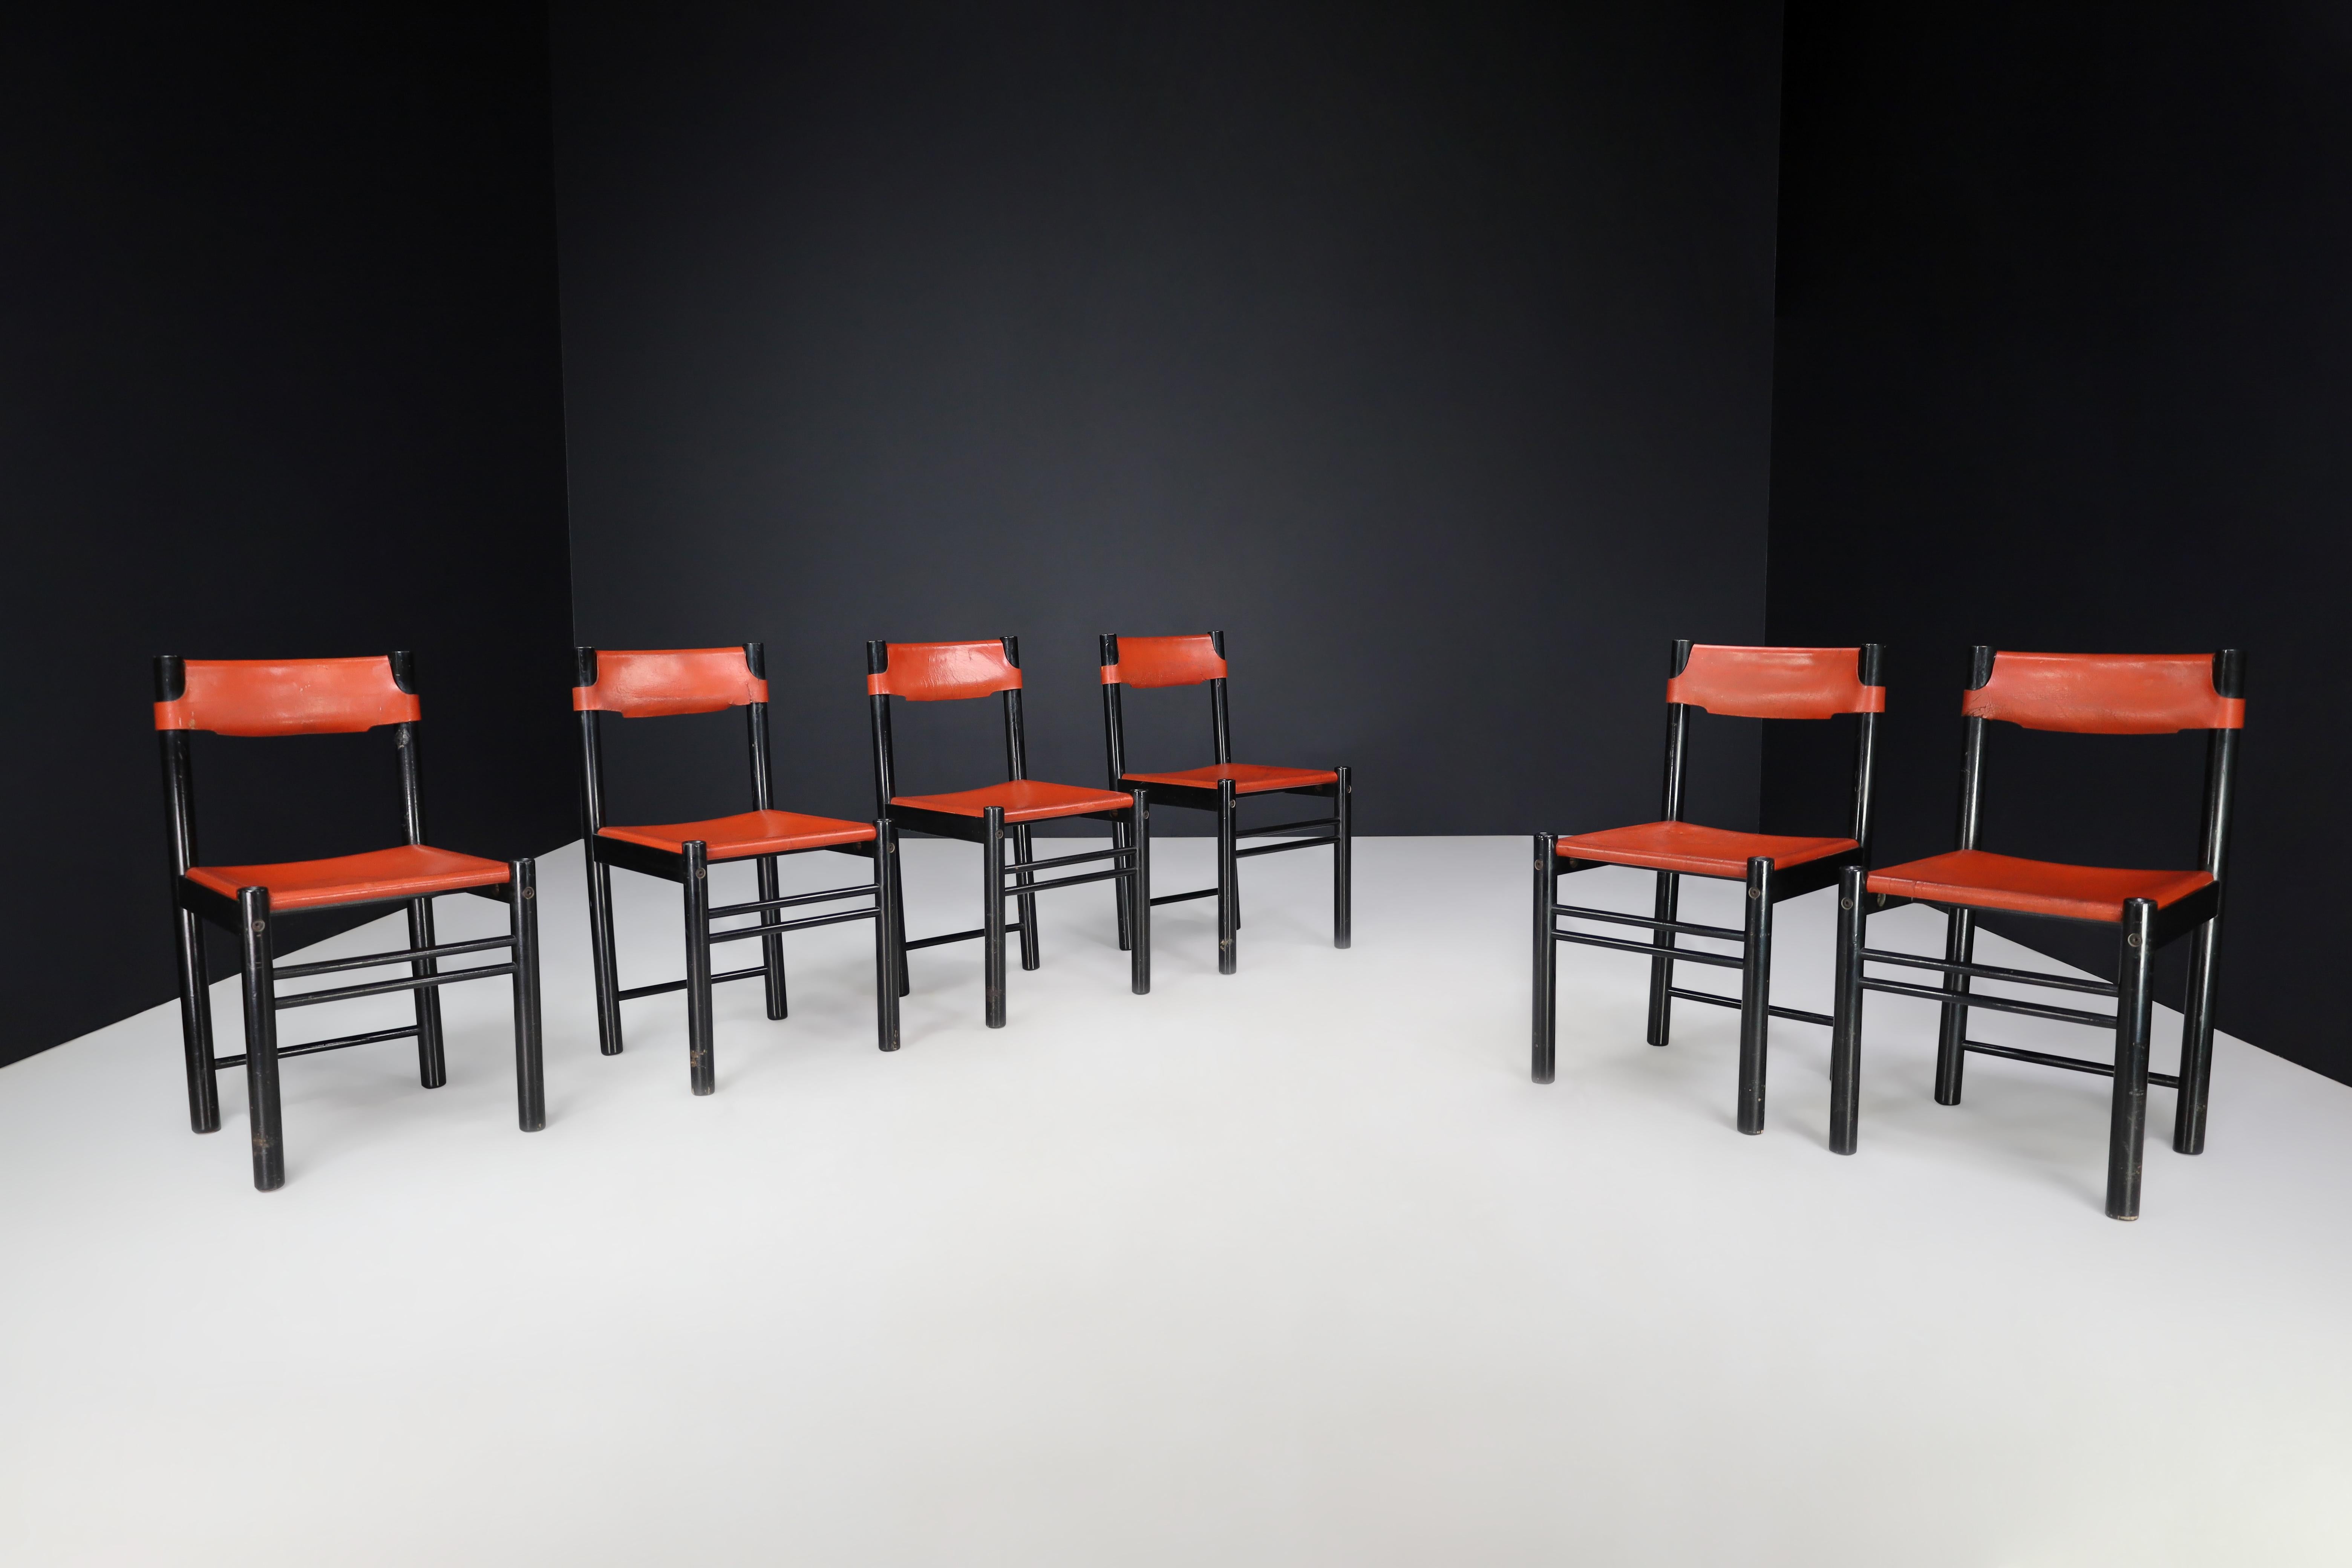 Ibisco Sedie Set of Six Dining Room Chairs with Patinated Cognac Leather, Italy 1970s 

This set of six dining room chairs, made in Italy in the 1970s by Ibisco Sedie, features a design that embodies the postmodern ethos of the era. The chairs have